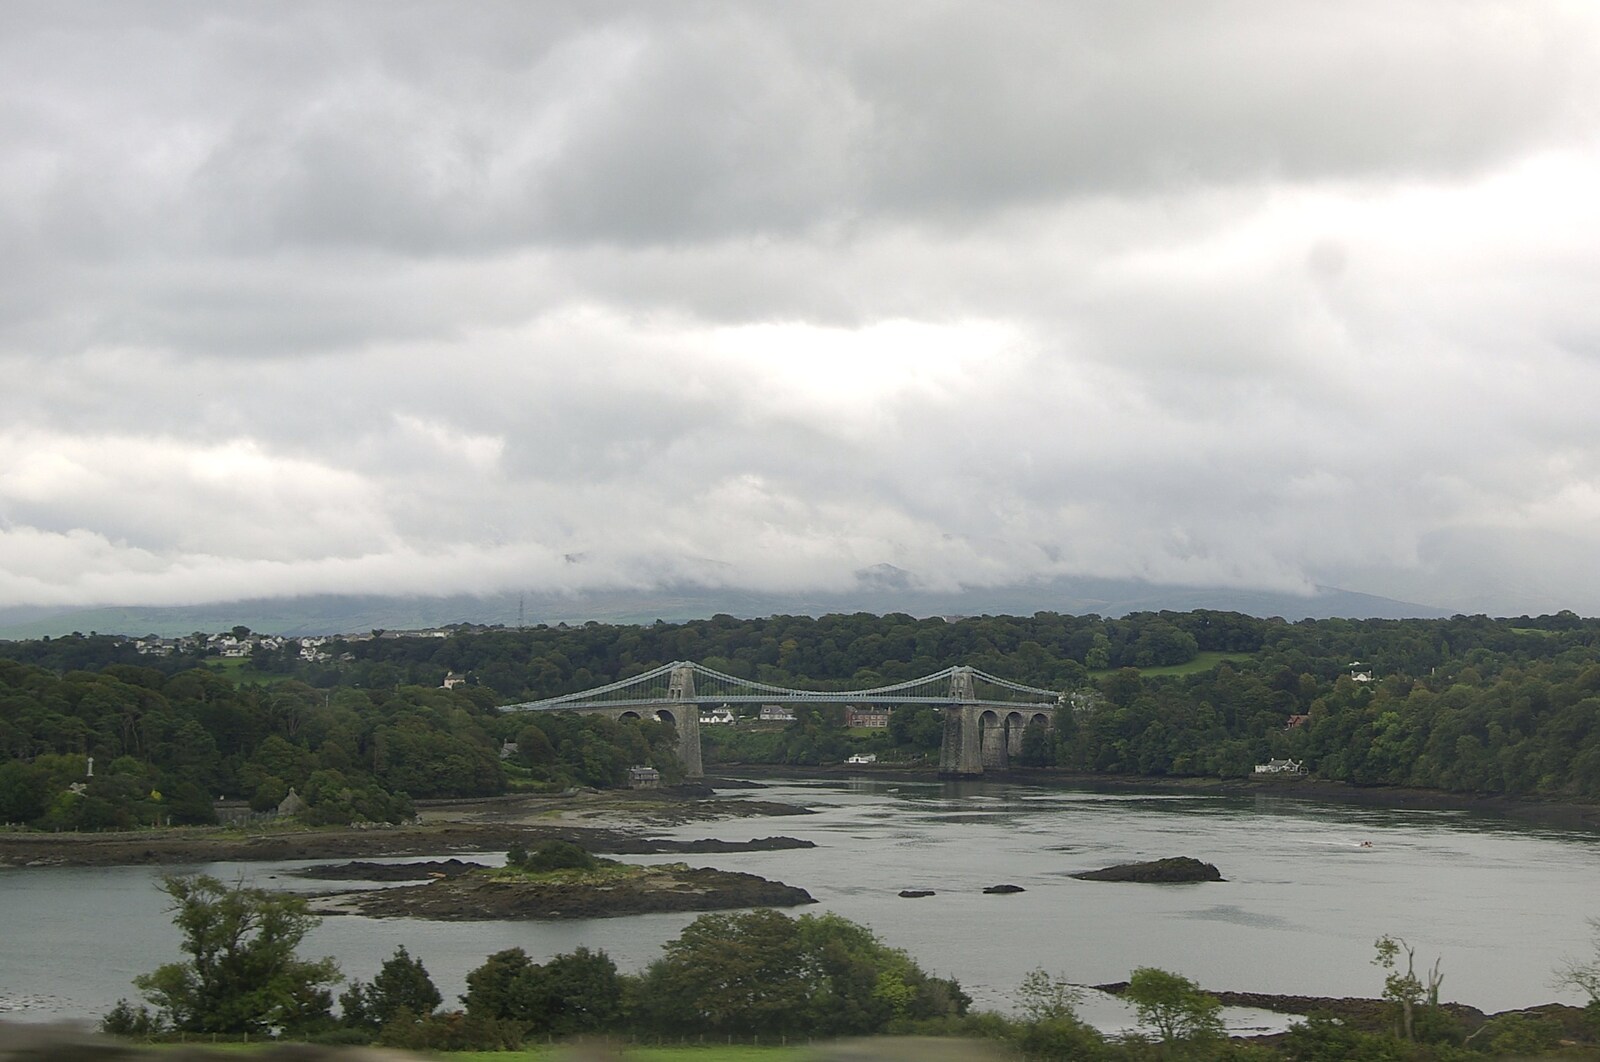 A Road Trip to Ireland Via Sandbach and Conwy, Cheshire and Wales - 21st September 2007: Telford's Bridge spans the Menai Straits between Wales and Anglesey